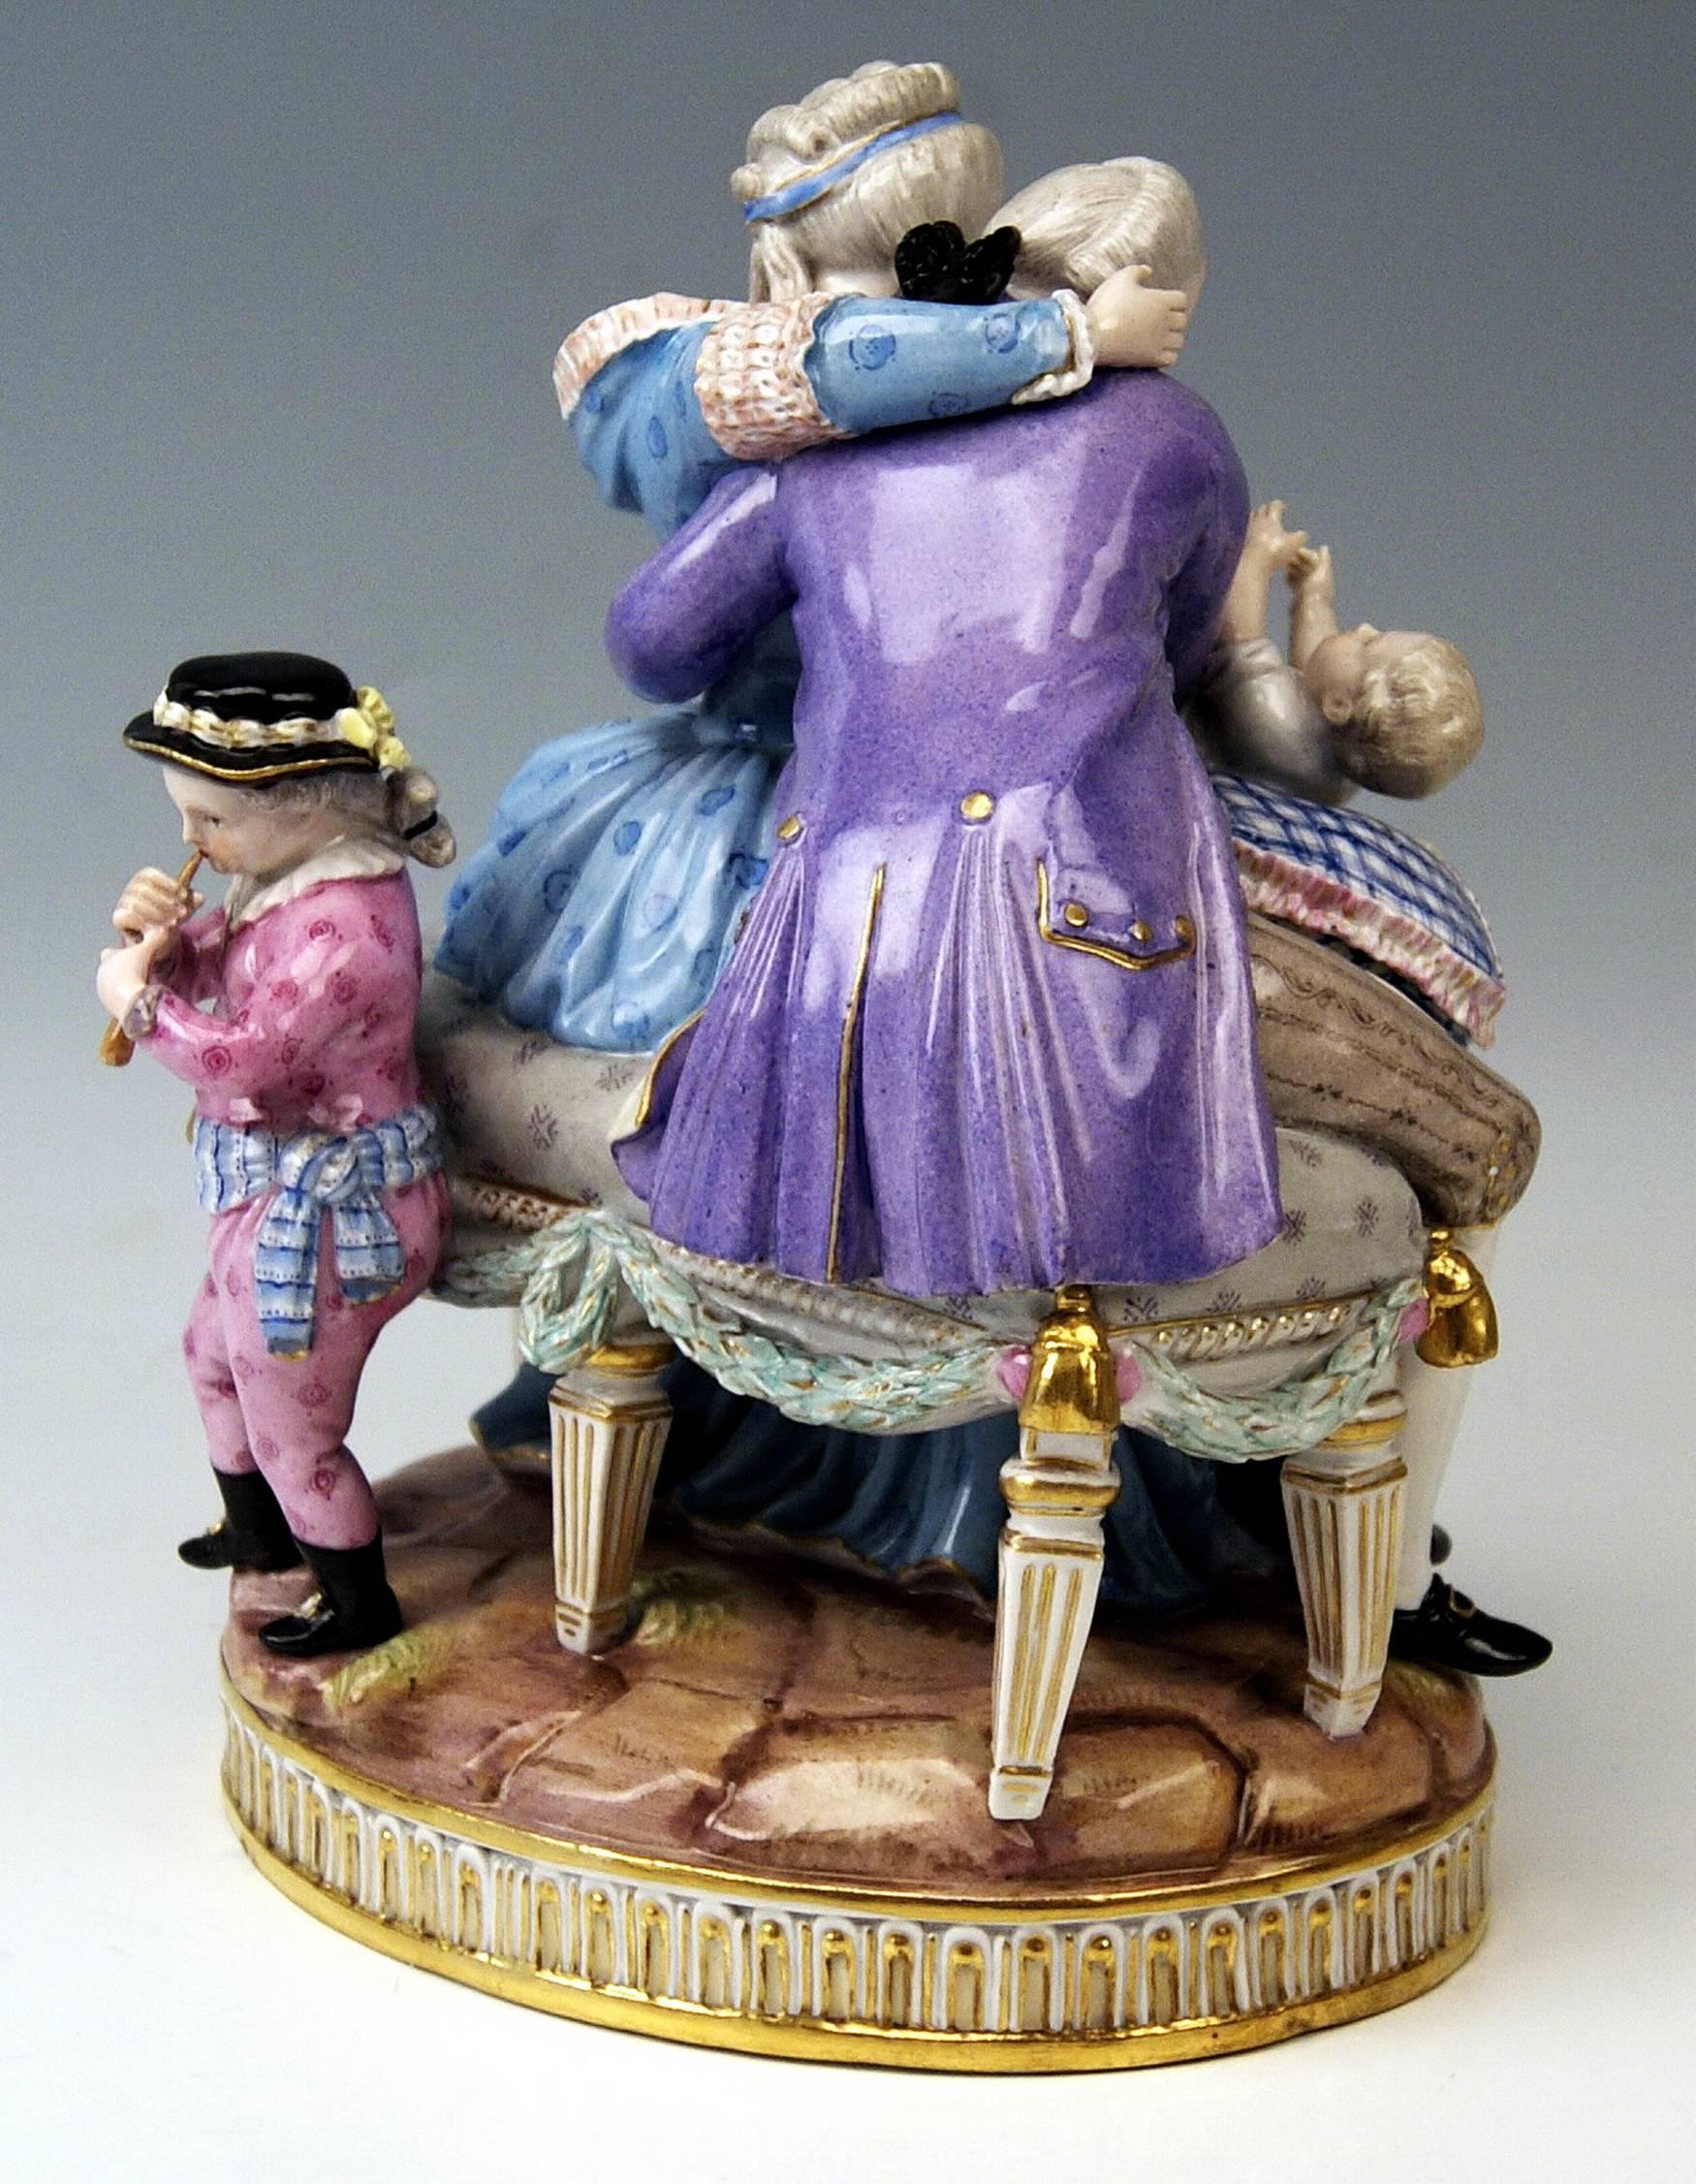 Rococo Meissen Stunning Figurines the Lucky Parents Model E81 by M. V. Acier, c.1860